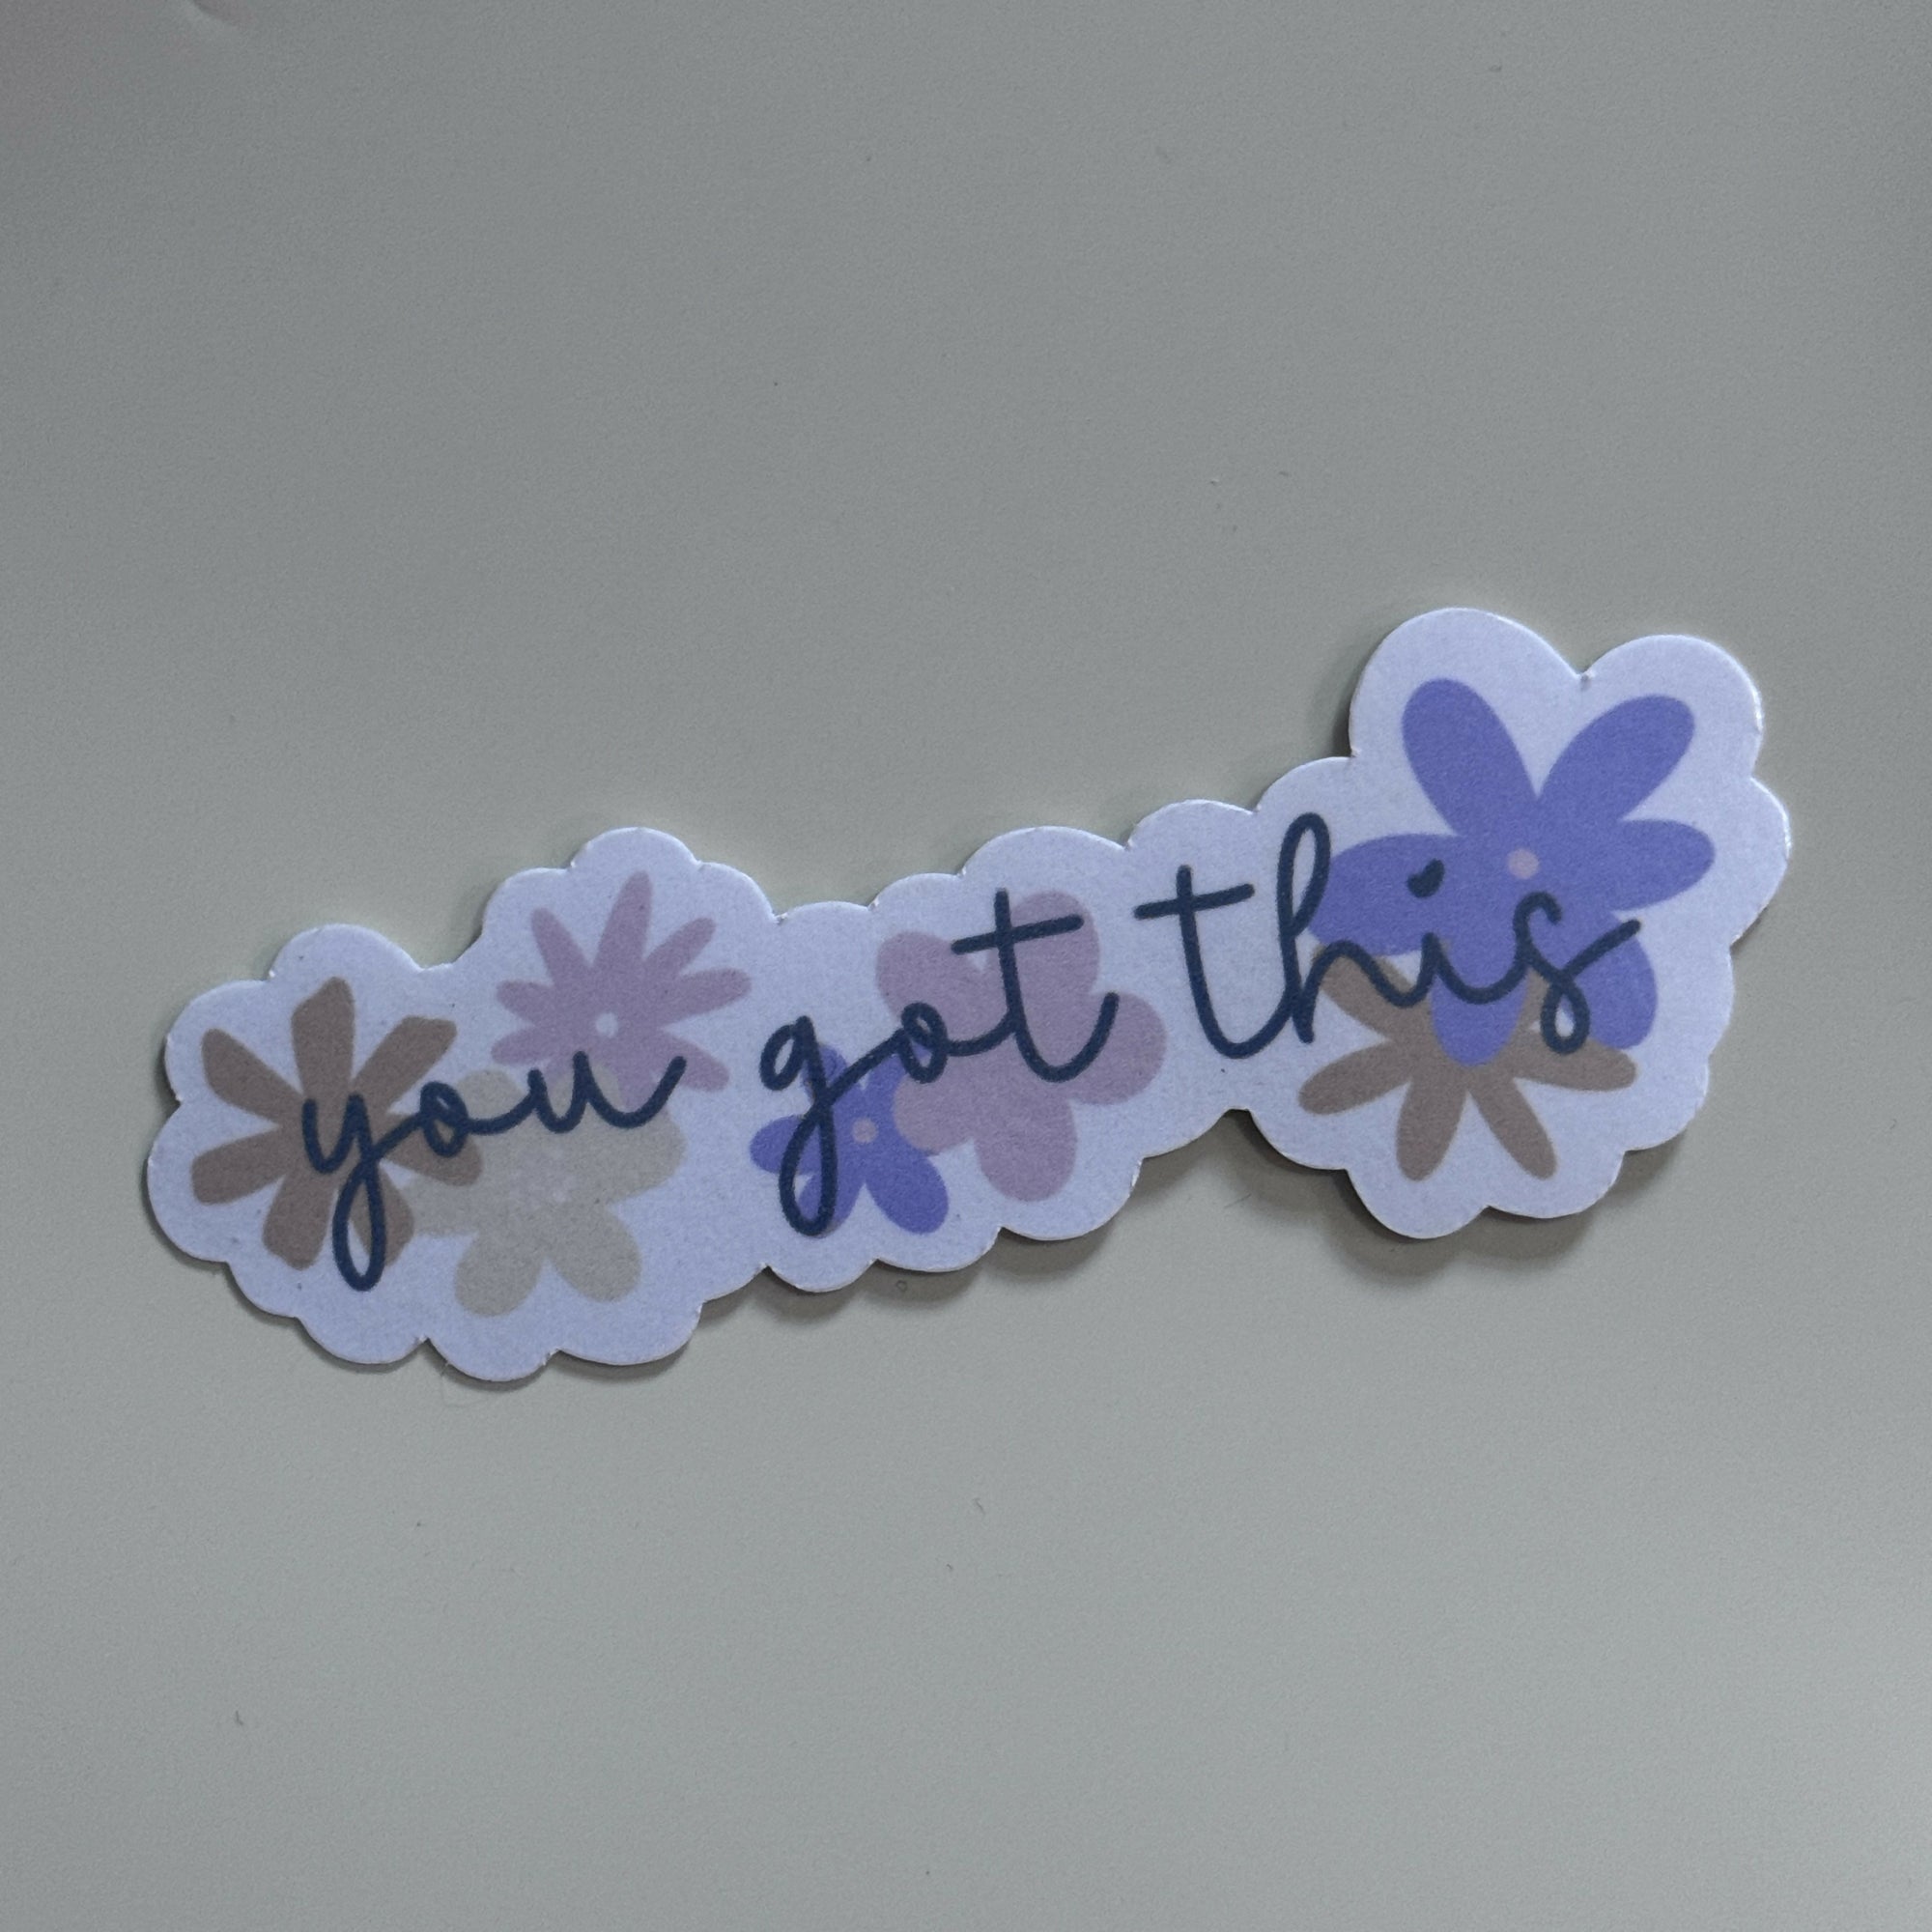 Artistic Xpressions | You Got This (floral) Sticker